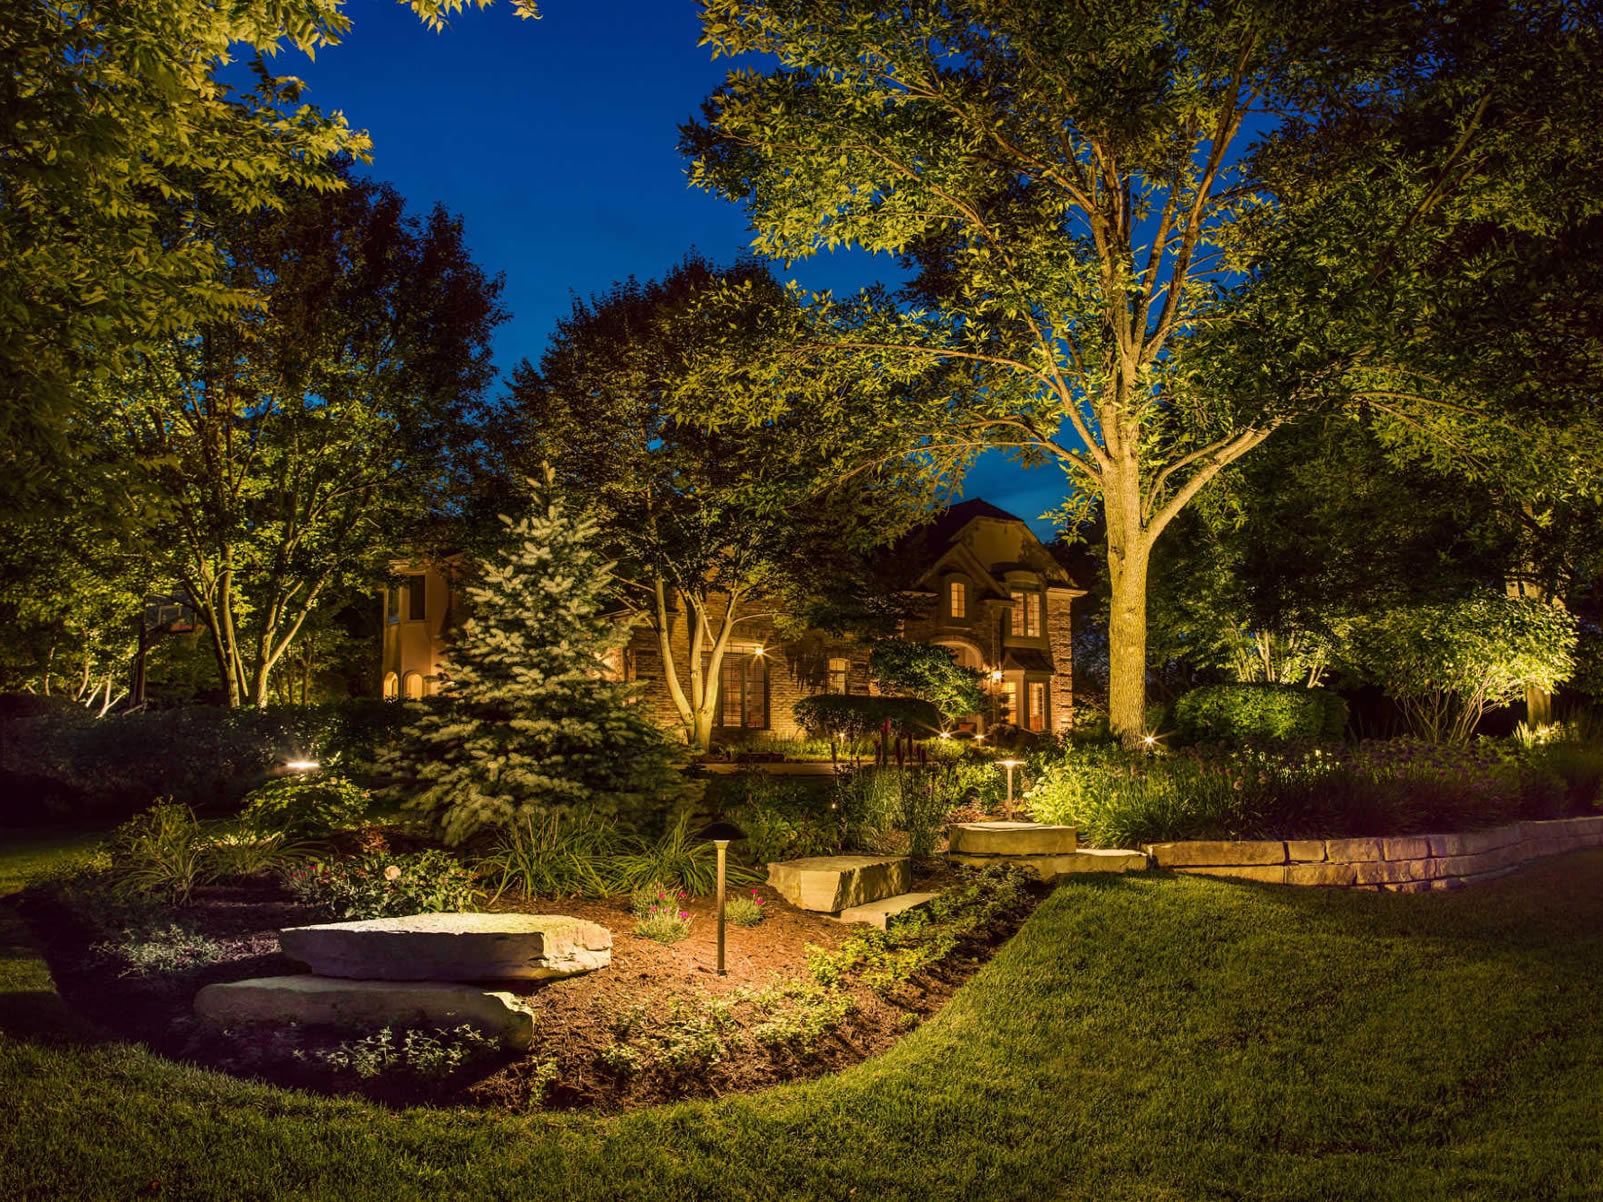 Amanda's Lawn Service | Landscaping Experts In St. Charles